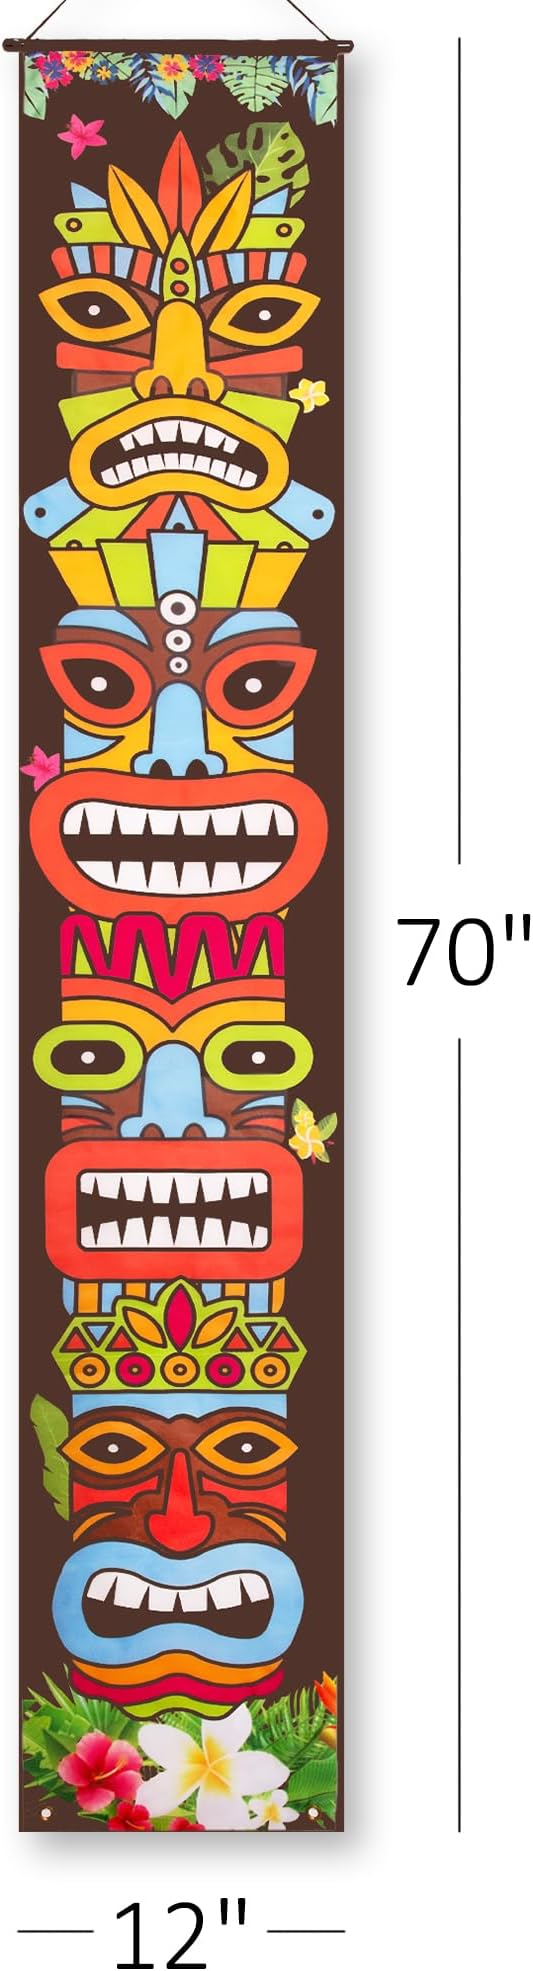 ArtCreativity Hawaiian Luau Party Decorations - Set of 2 Banners - 6 x 1 Feet - Tropical Party Decor with Colorful Tiki Faces - Nylon Tiki Themed Party Decorations for Indoors and Outdoors